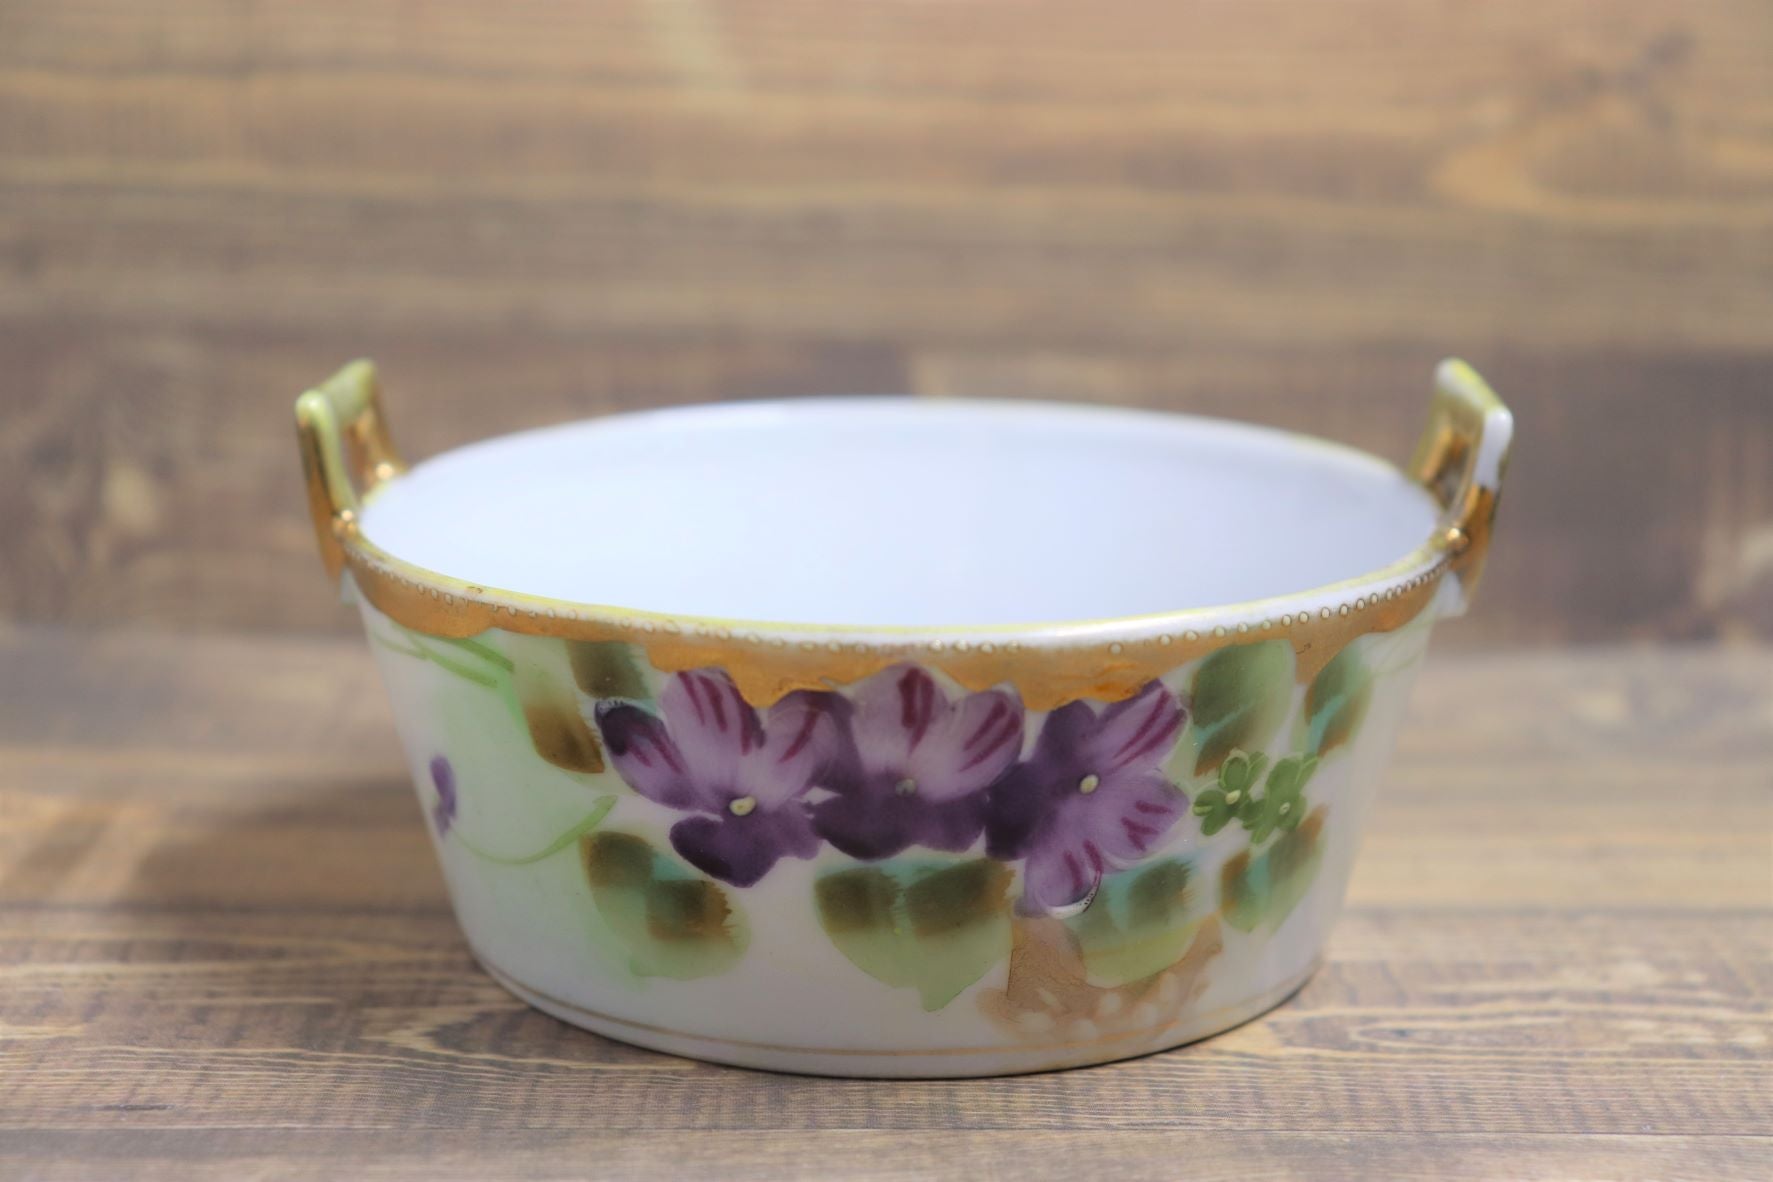 Old Small Hand Painted Bowl With Violets